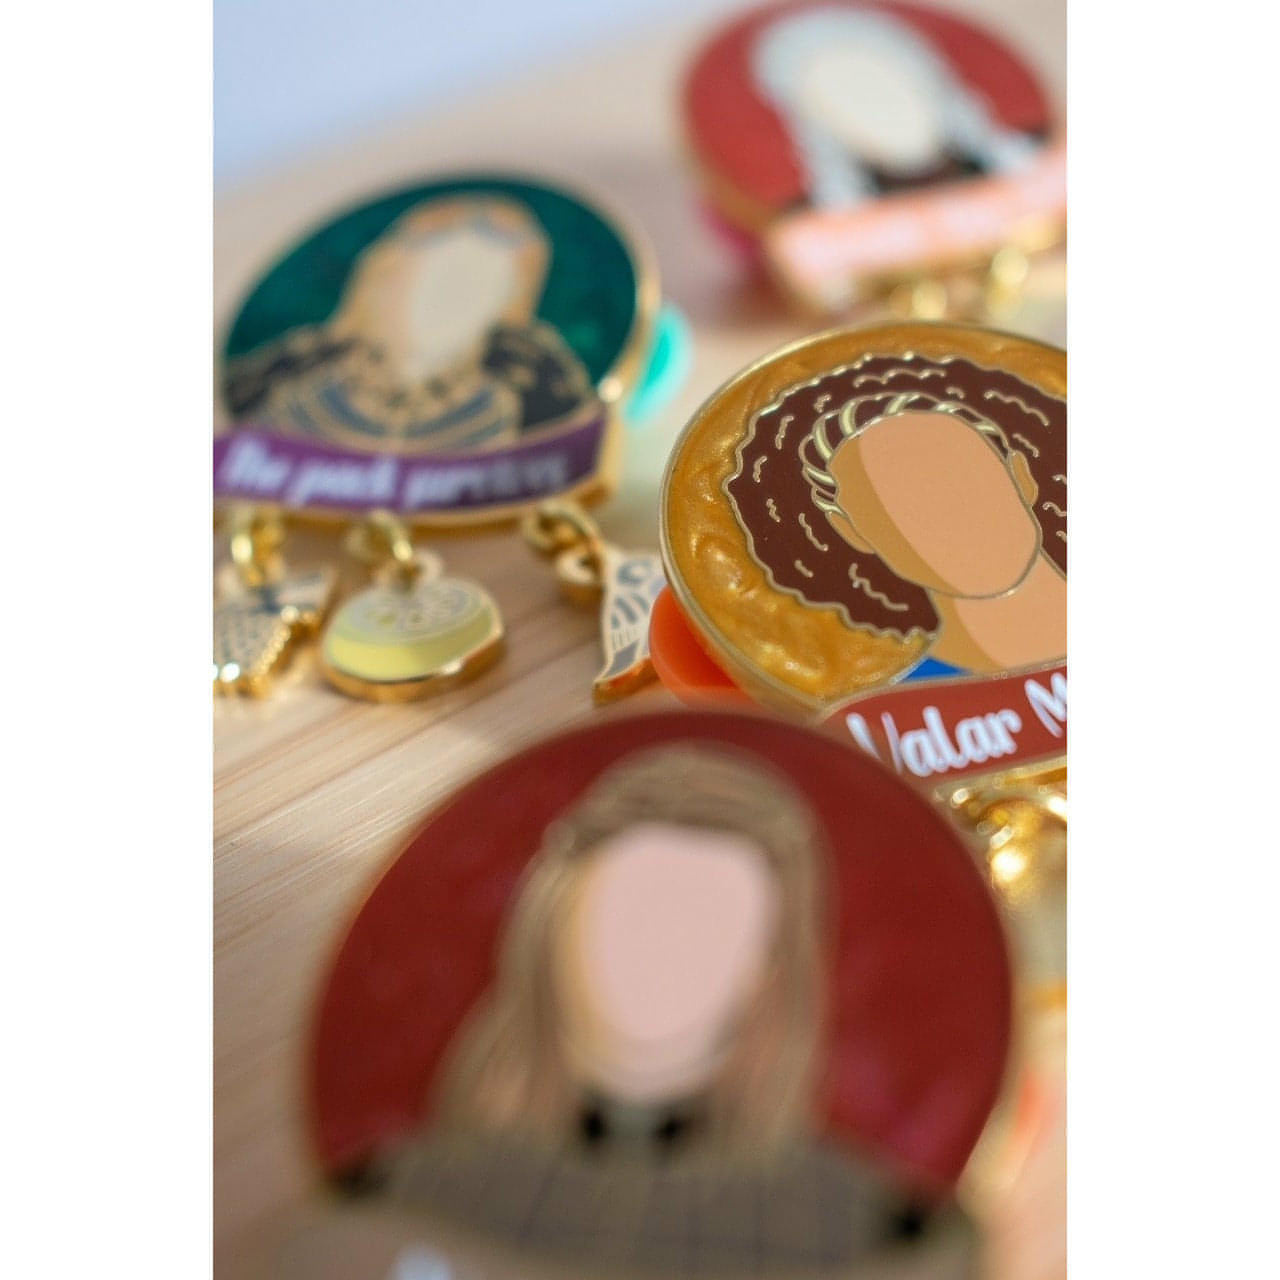 The image shows a close up of some Women of Westeros pins with the Missandei pin in focus.